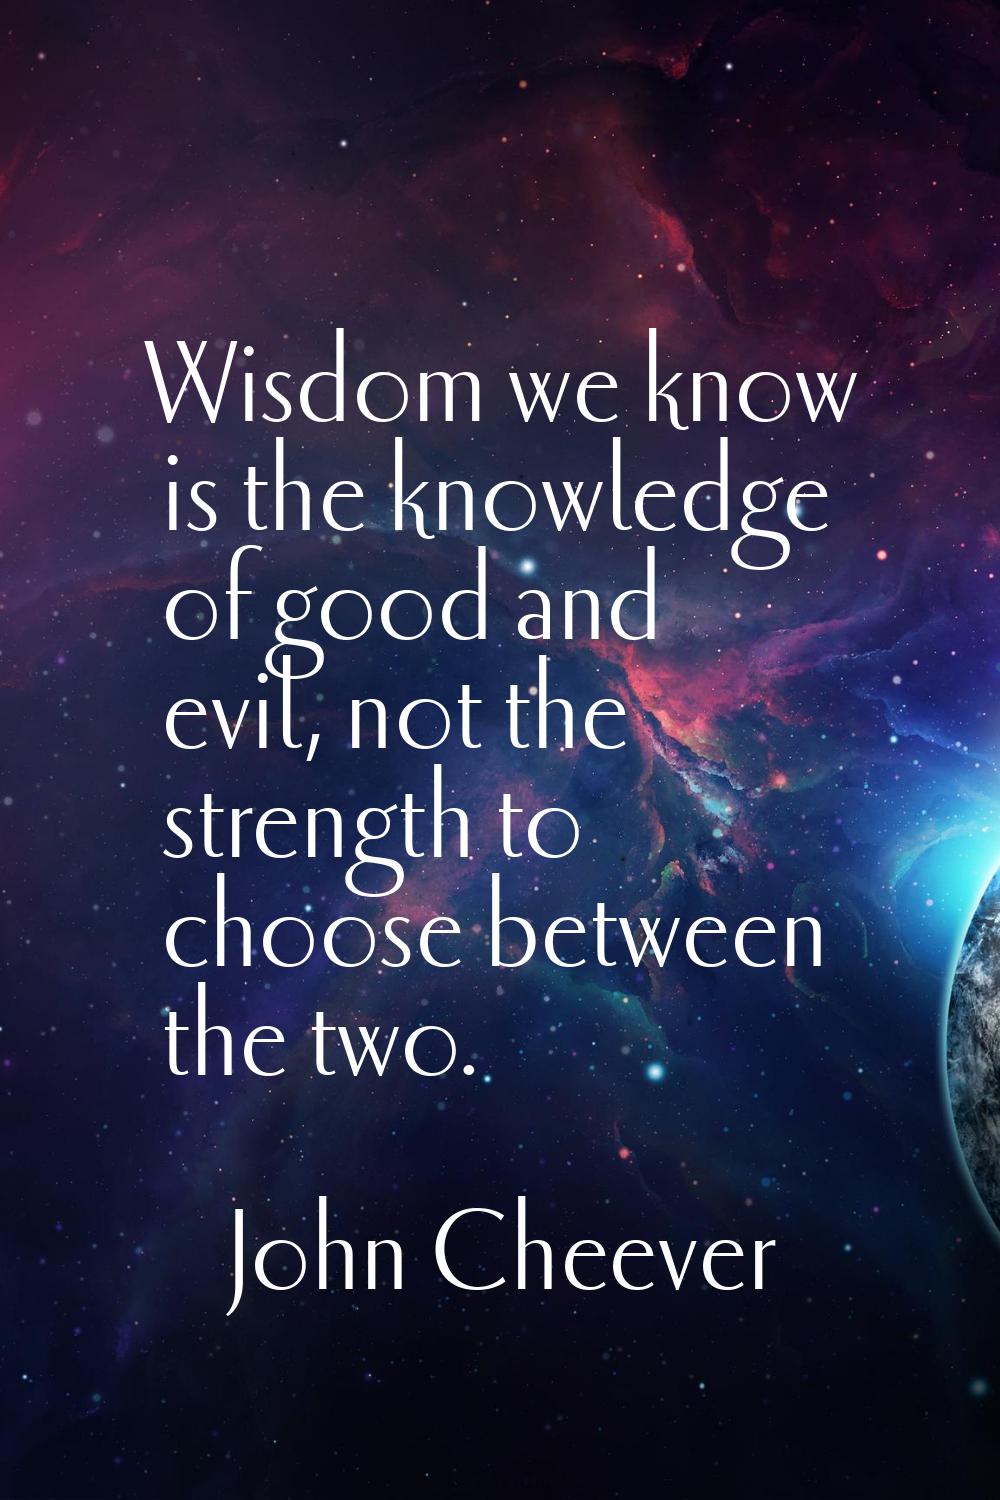 Wisdom we know is the knowledge of good and evil, not the strength to choose between the two.